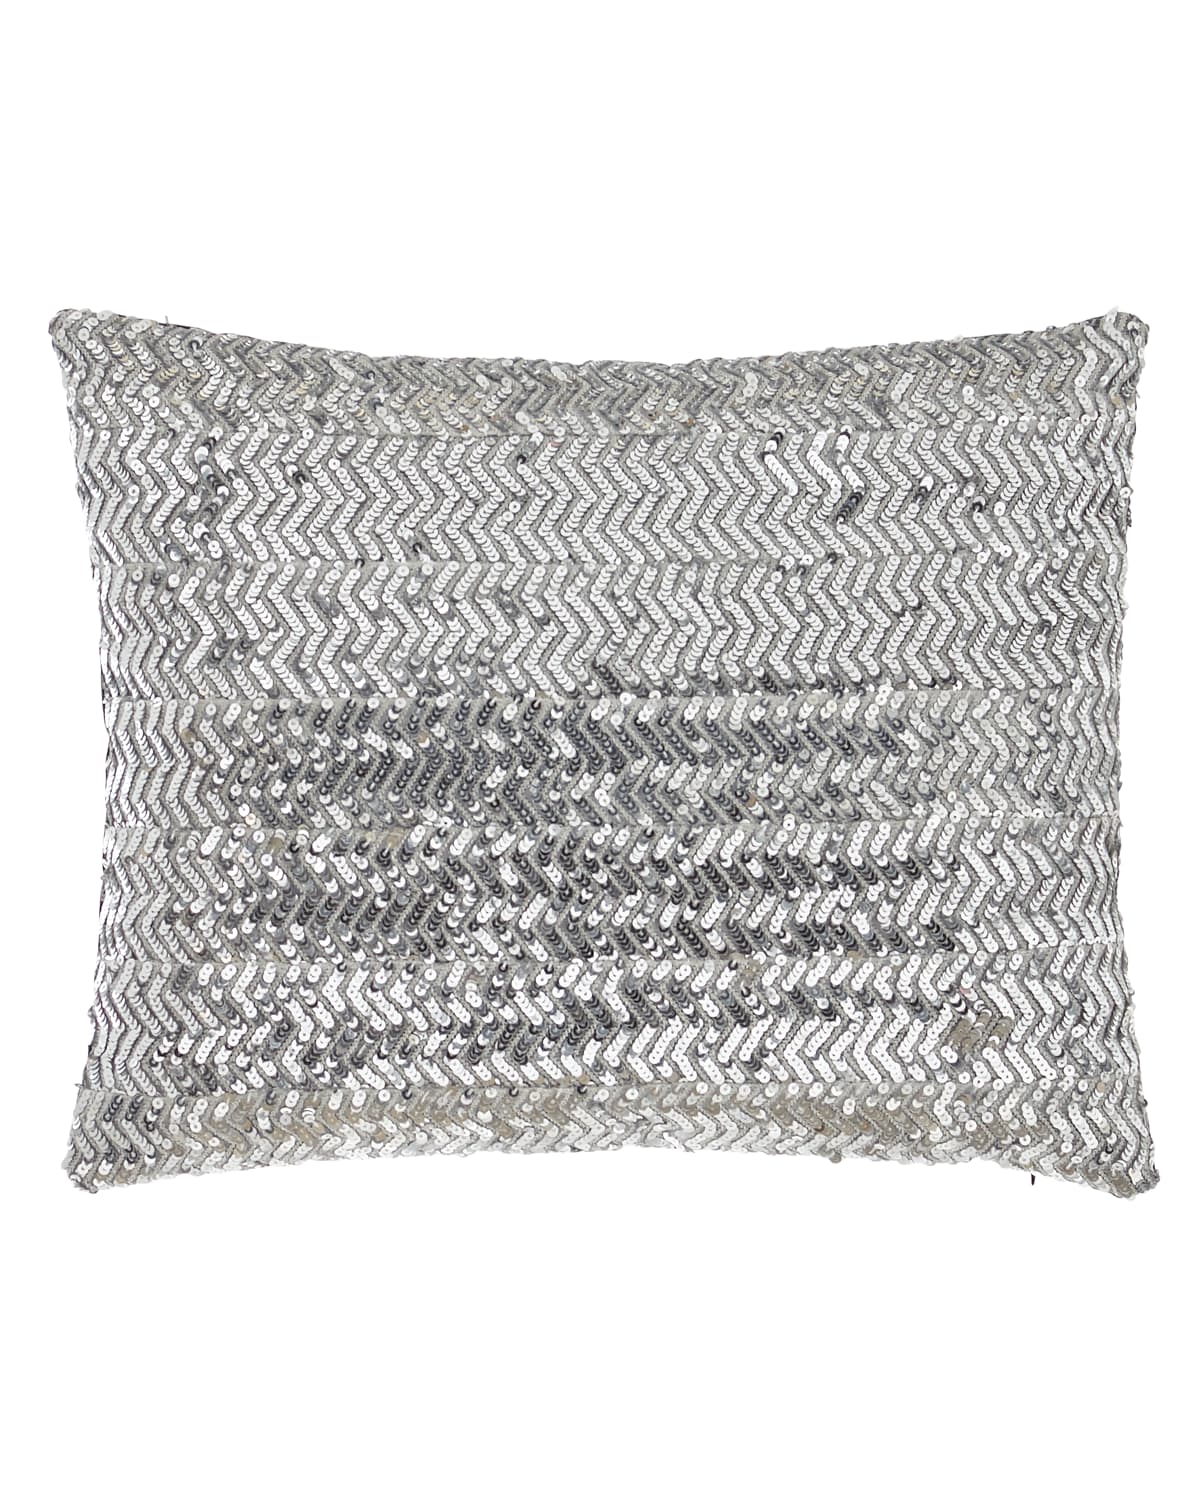 Image Sweet Dreams Bianca Silver Sequin Pillow